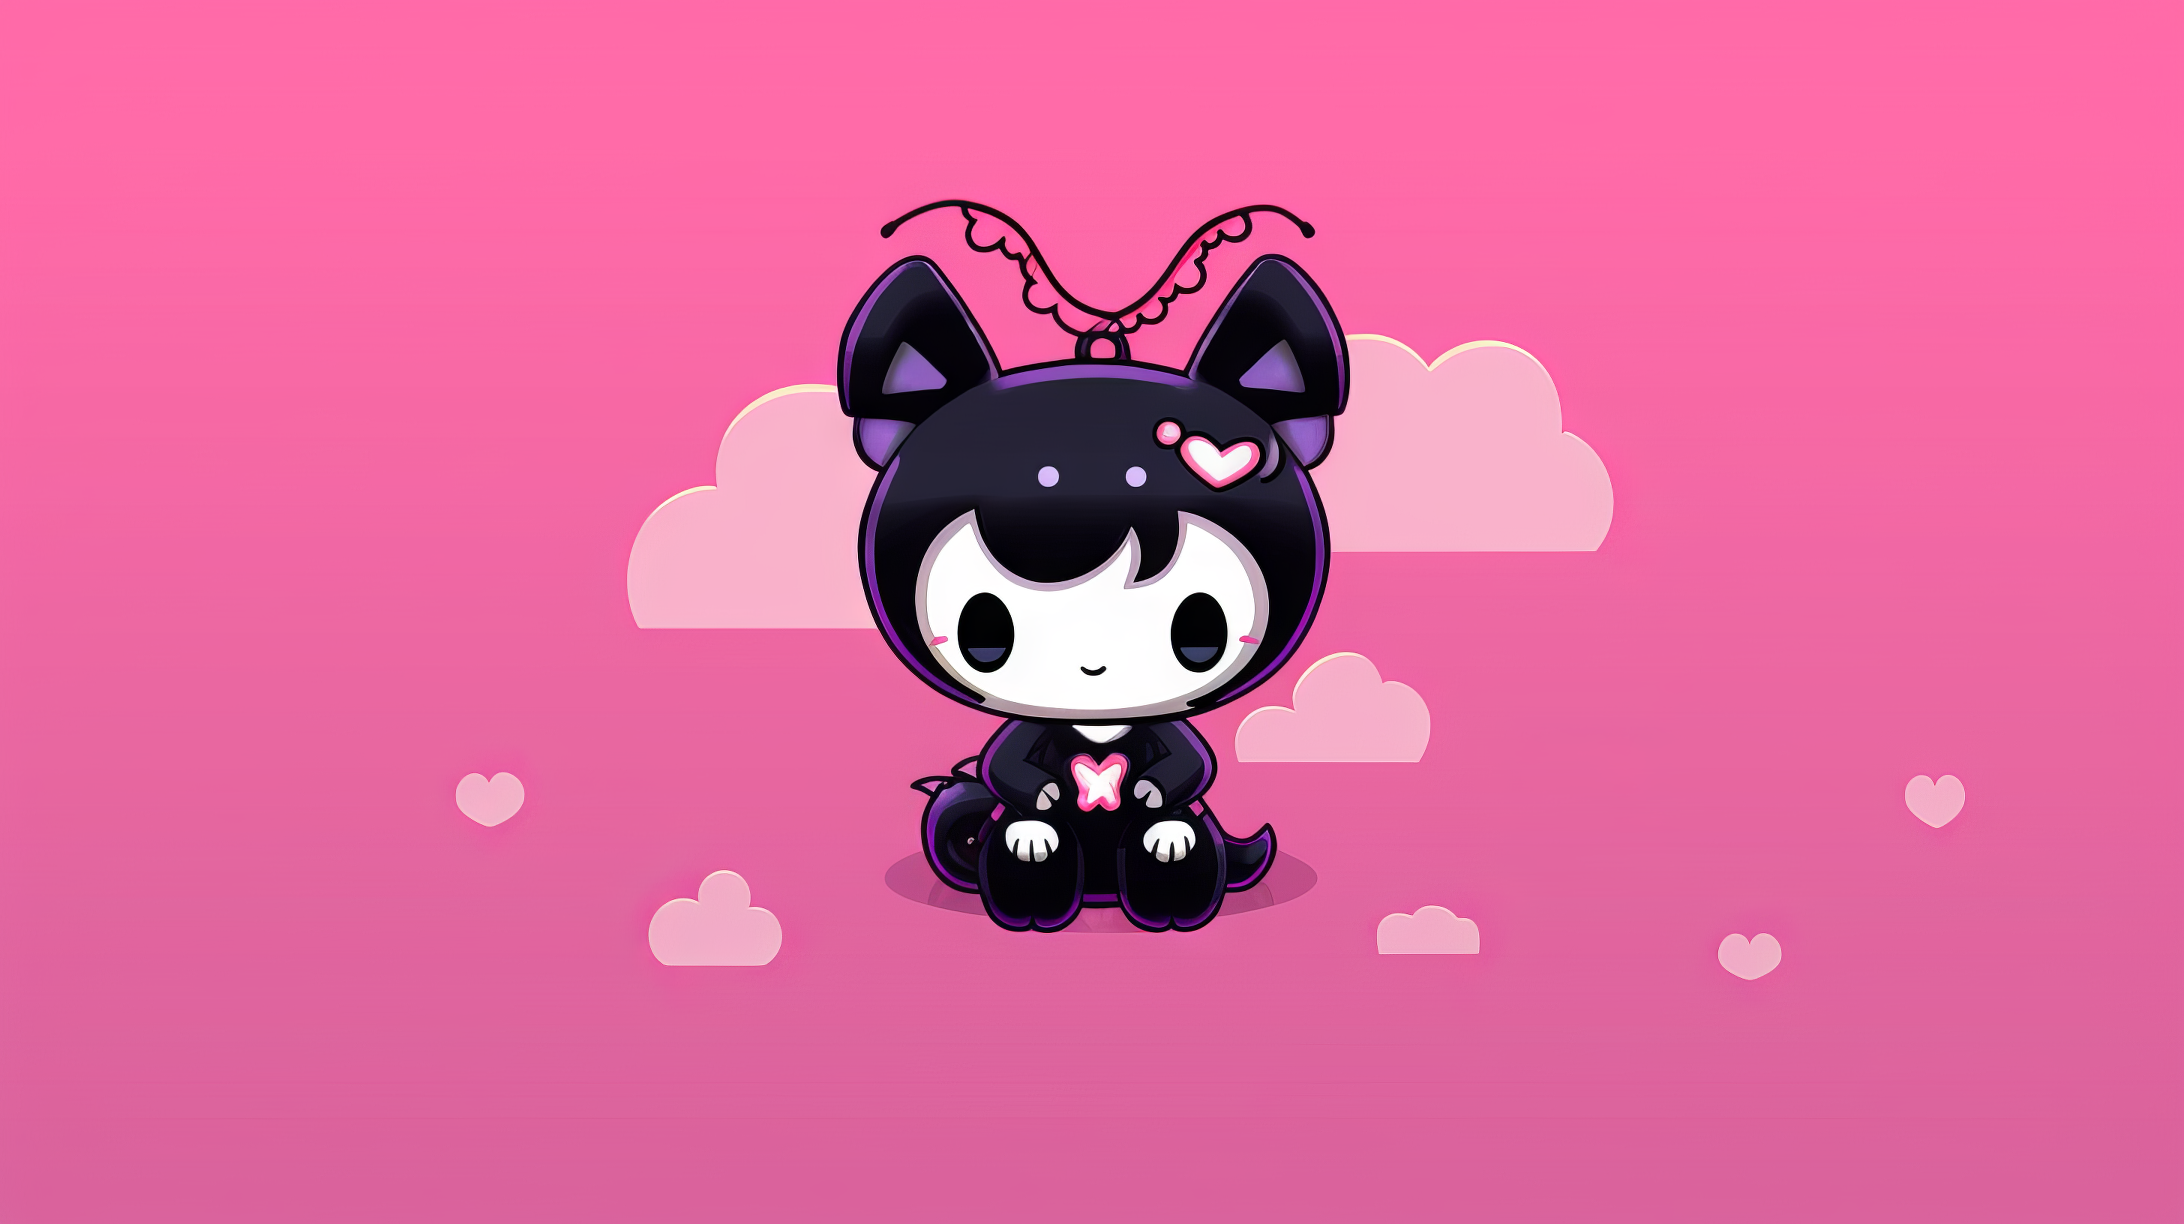 HD desktop wallpaper featuring Kuromi from Onegai My Melody against a pink background with hearts and clouds.